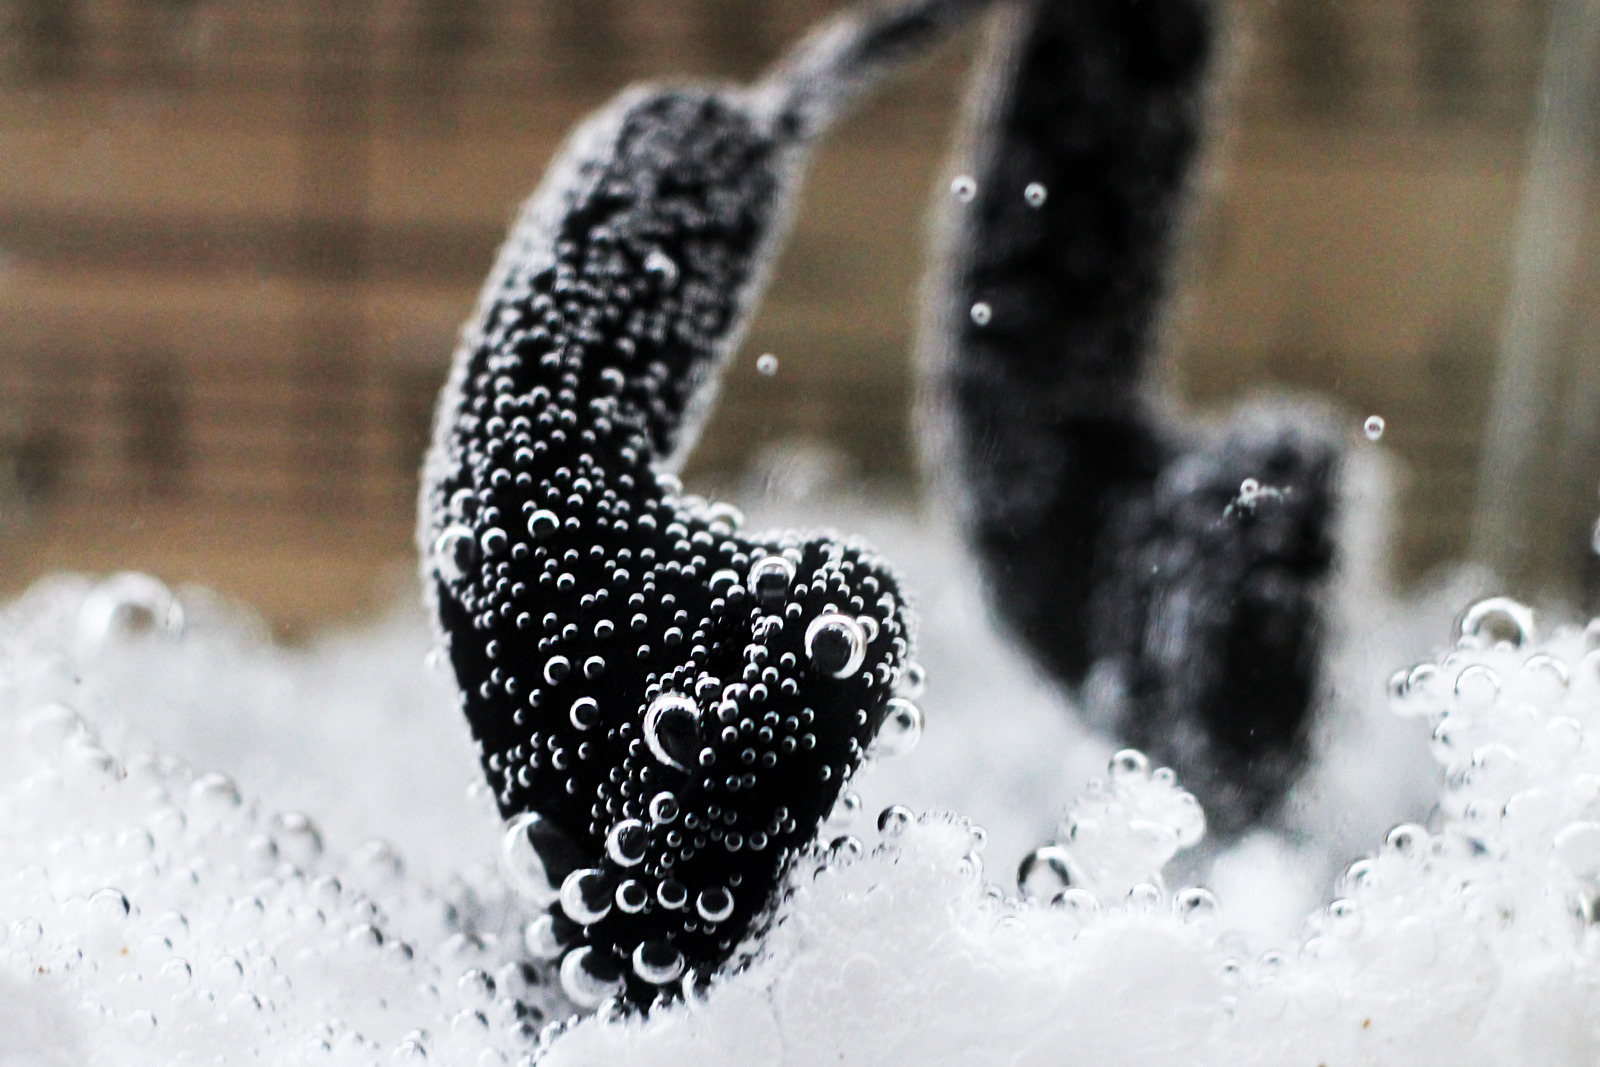 Black headphones in water with bubbles, sound